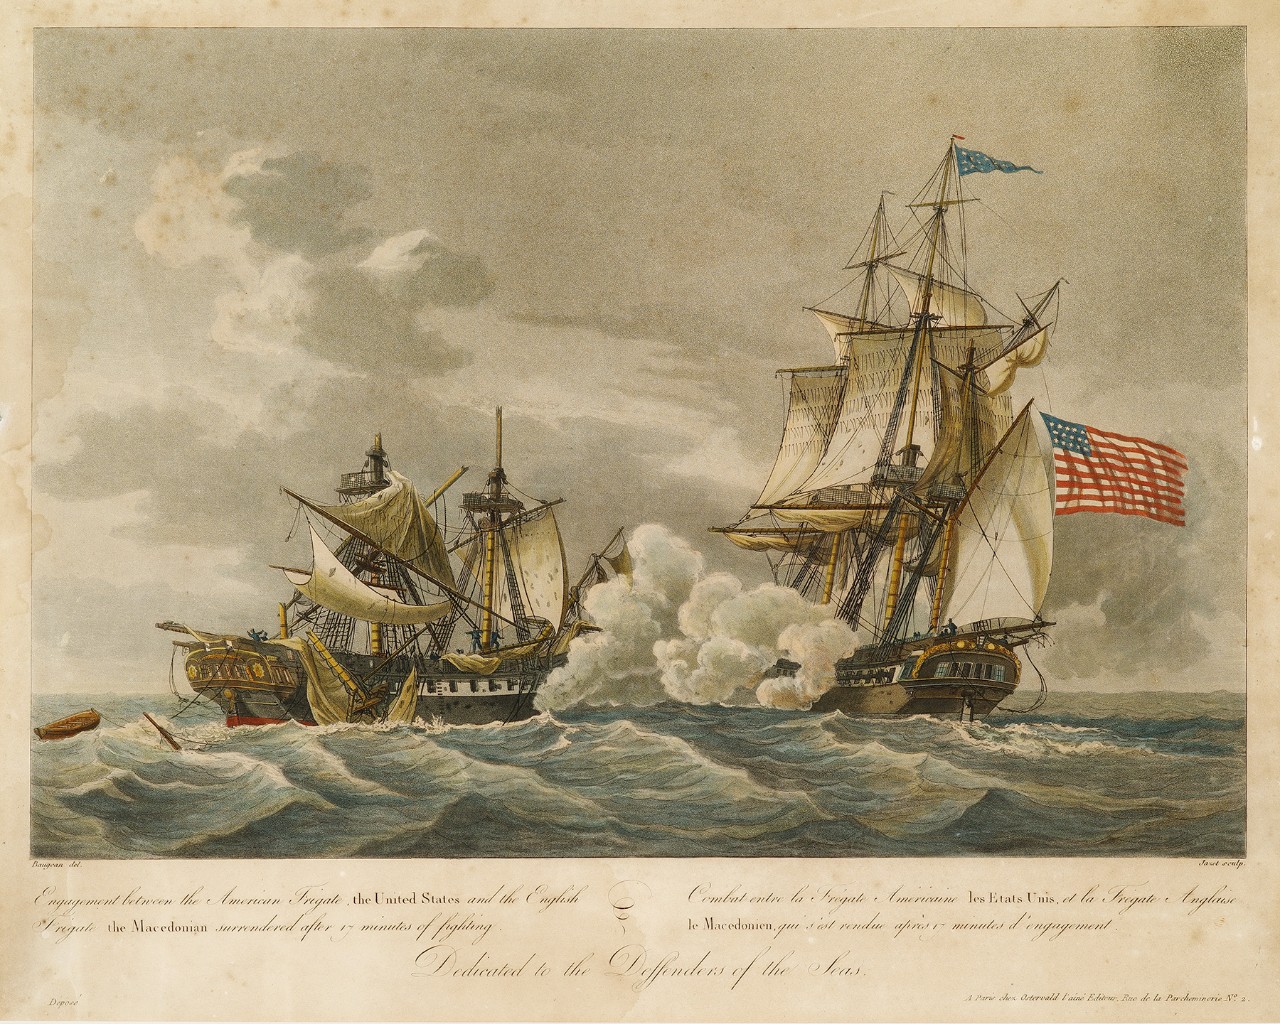 The American ship on the right firing into the demasted British ship on the left